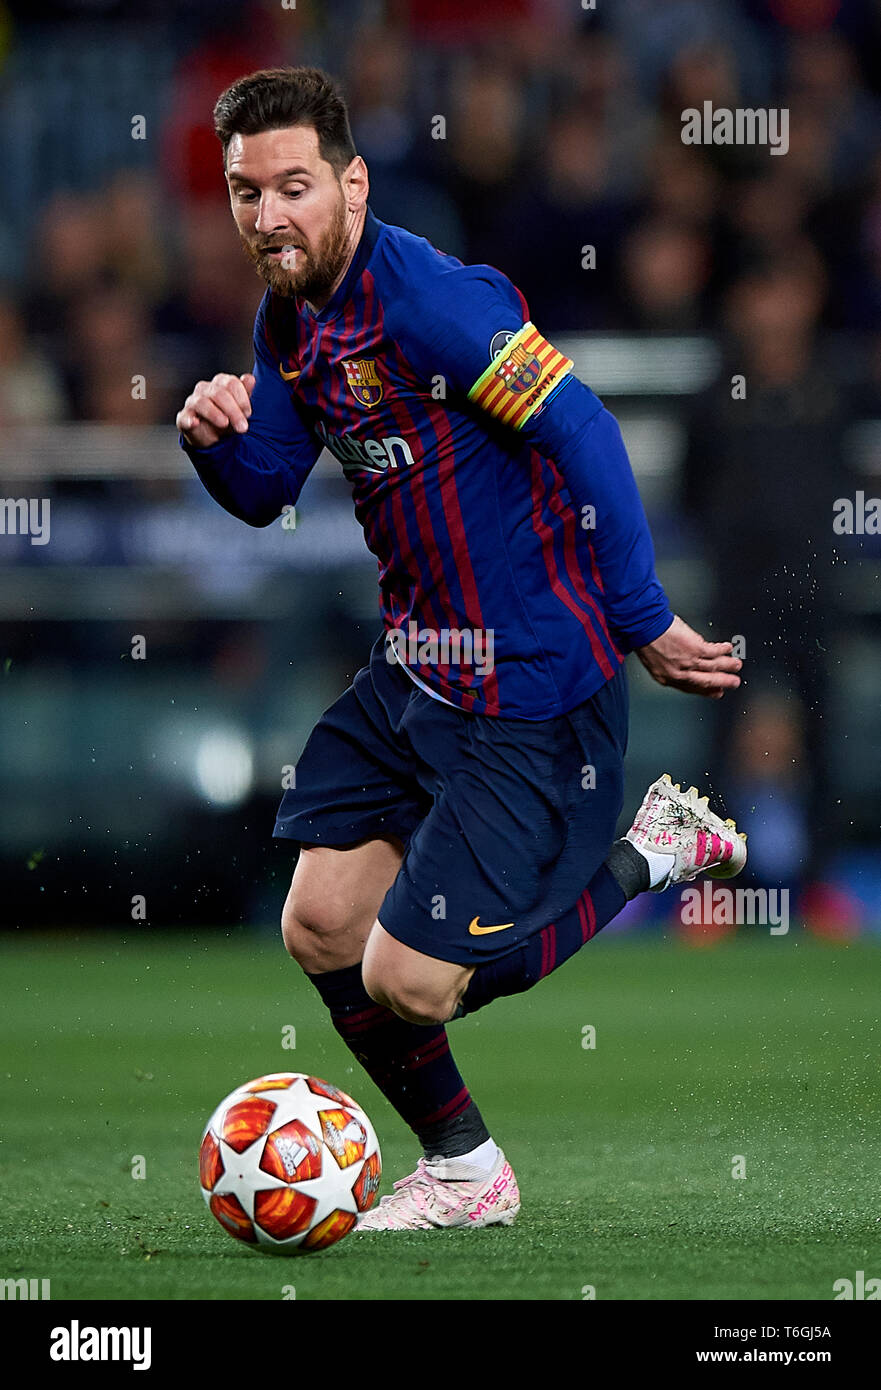 Barcelona, Spain. 1st May, 2019. Soccer: UEFA Champions League 2018/19 :  Lionel Messi of Barcelona in action during the UEFA Champions League Match  between FC Barcelona vs Liverpool FC at Camp Nou